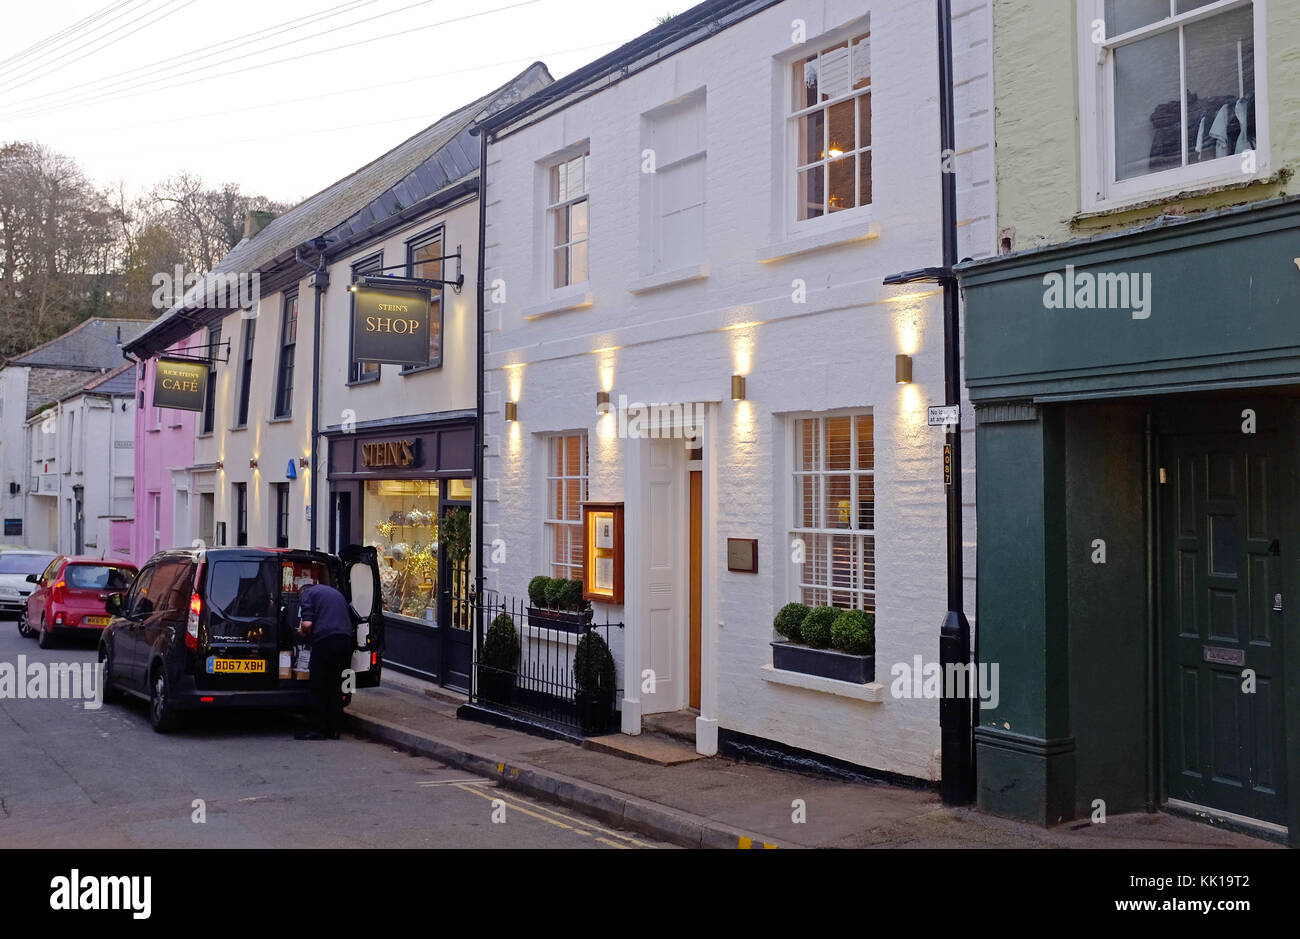 Paul Ainsworth at No6 restaurant next door to Rick Steins cafe at Padstow in Cornwall UK Stock Photo